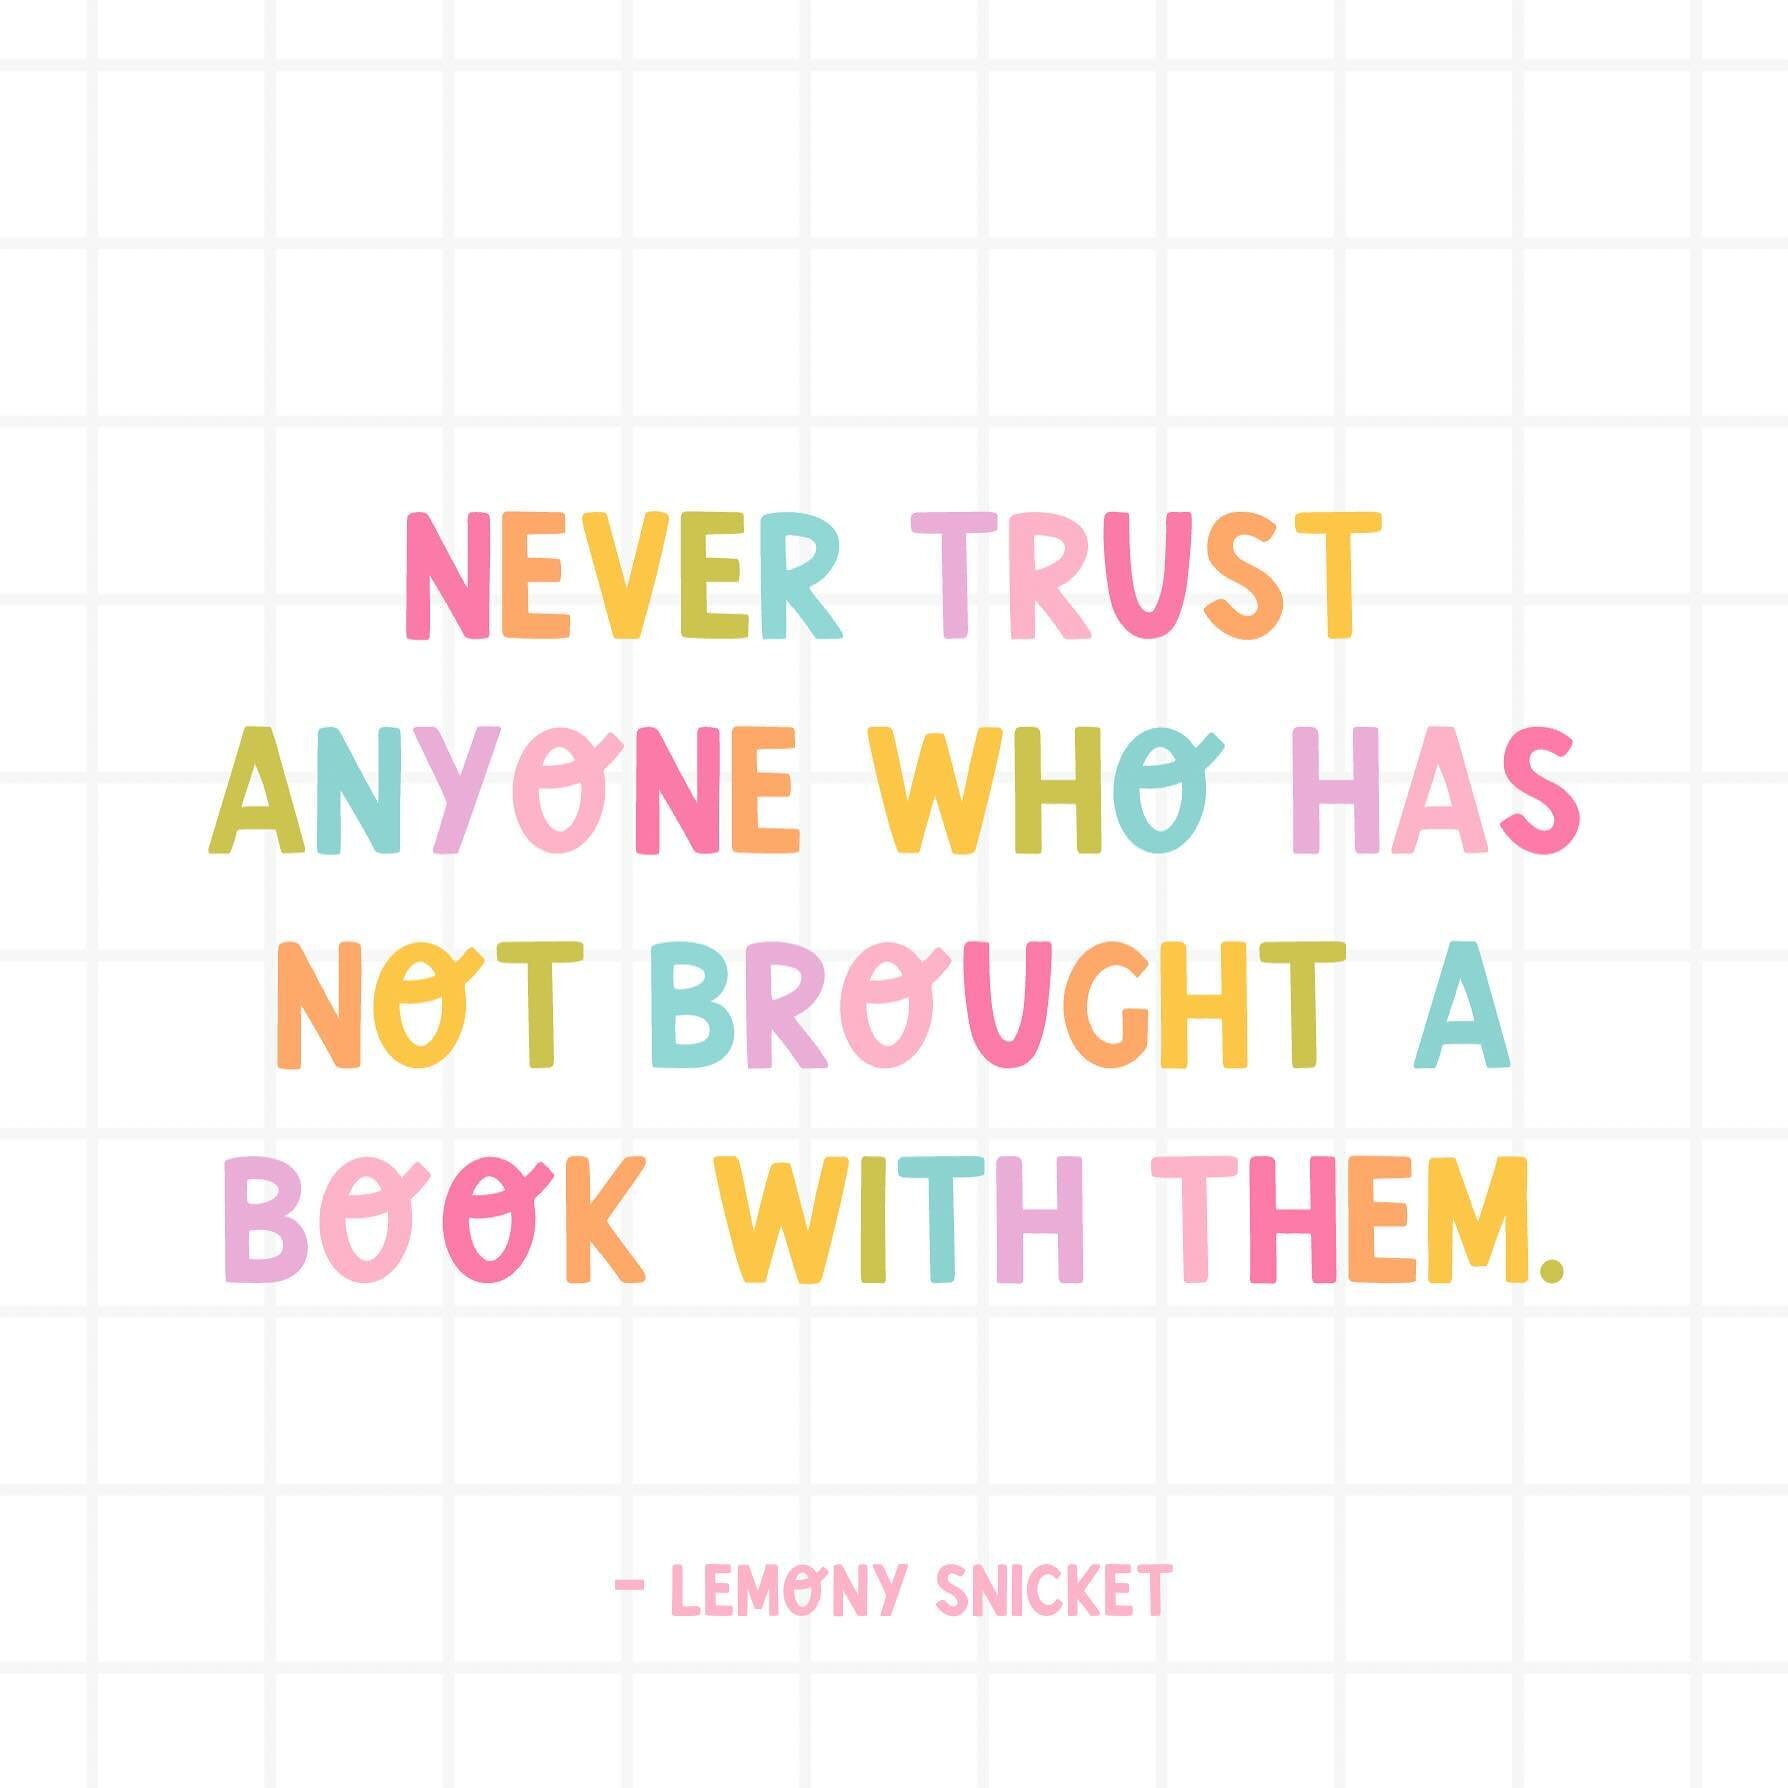 In celebration of meeting Lemony Snicket himself last weekend, a very peculiar Lemony Snicket quote. I think out of all books I have read in my life, it is safe to say that Lemony Snicket&rsquo;s tone of voice is my very favourite. I usually don&rsqu